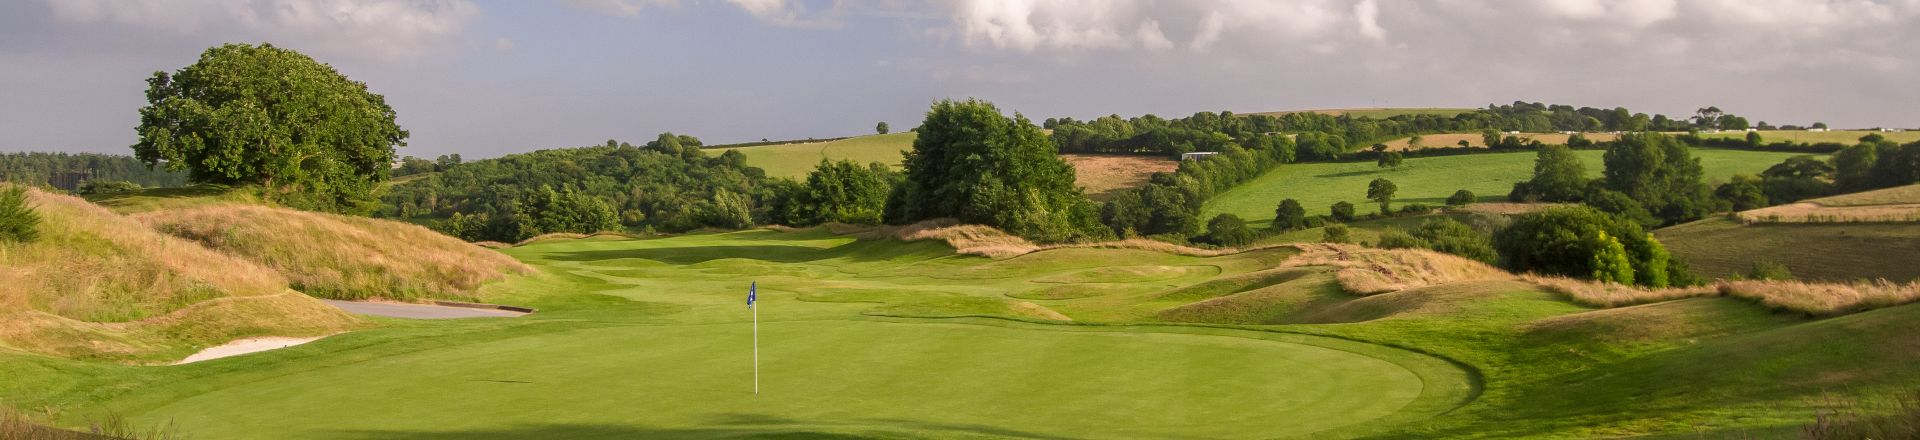 St. Mellion The Nicklaus Golf Course